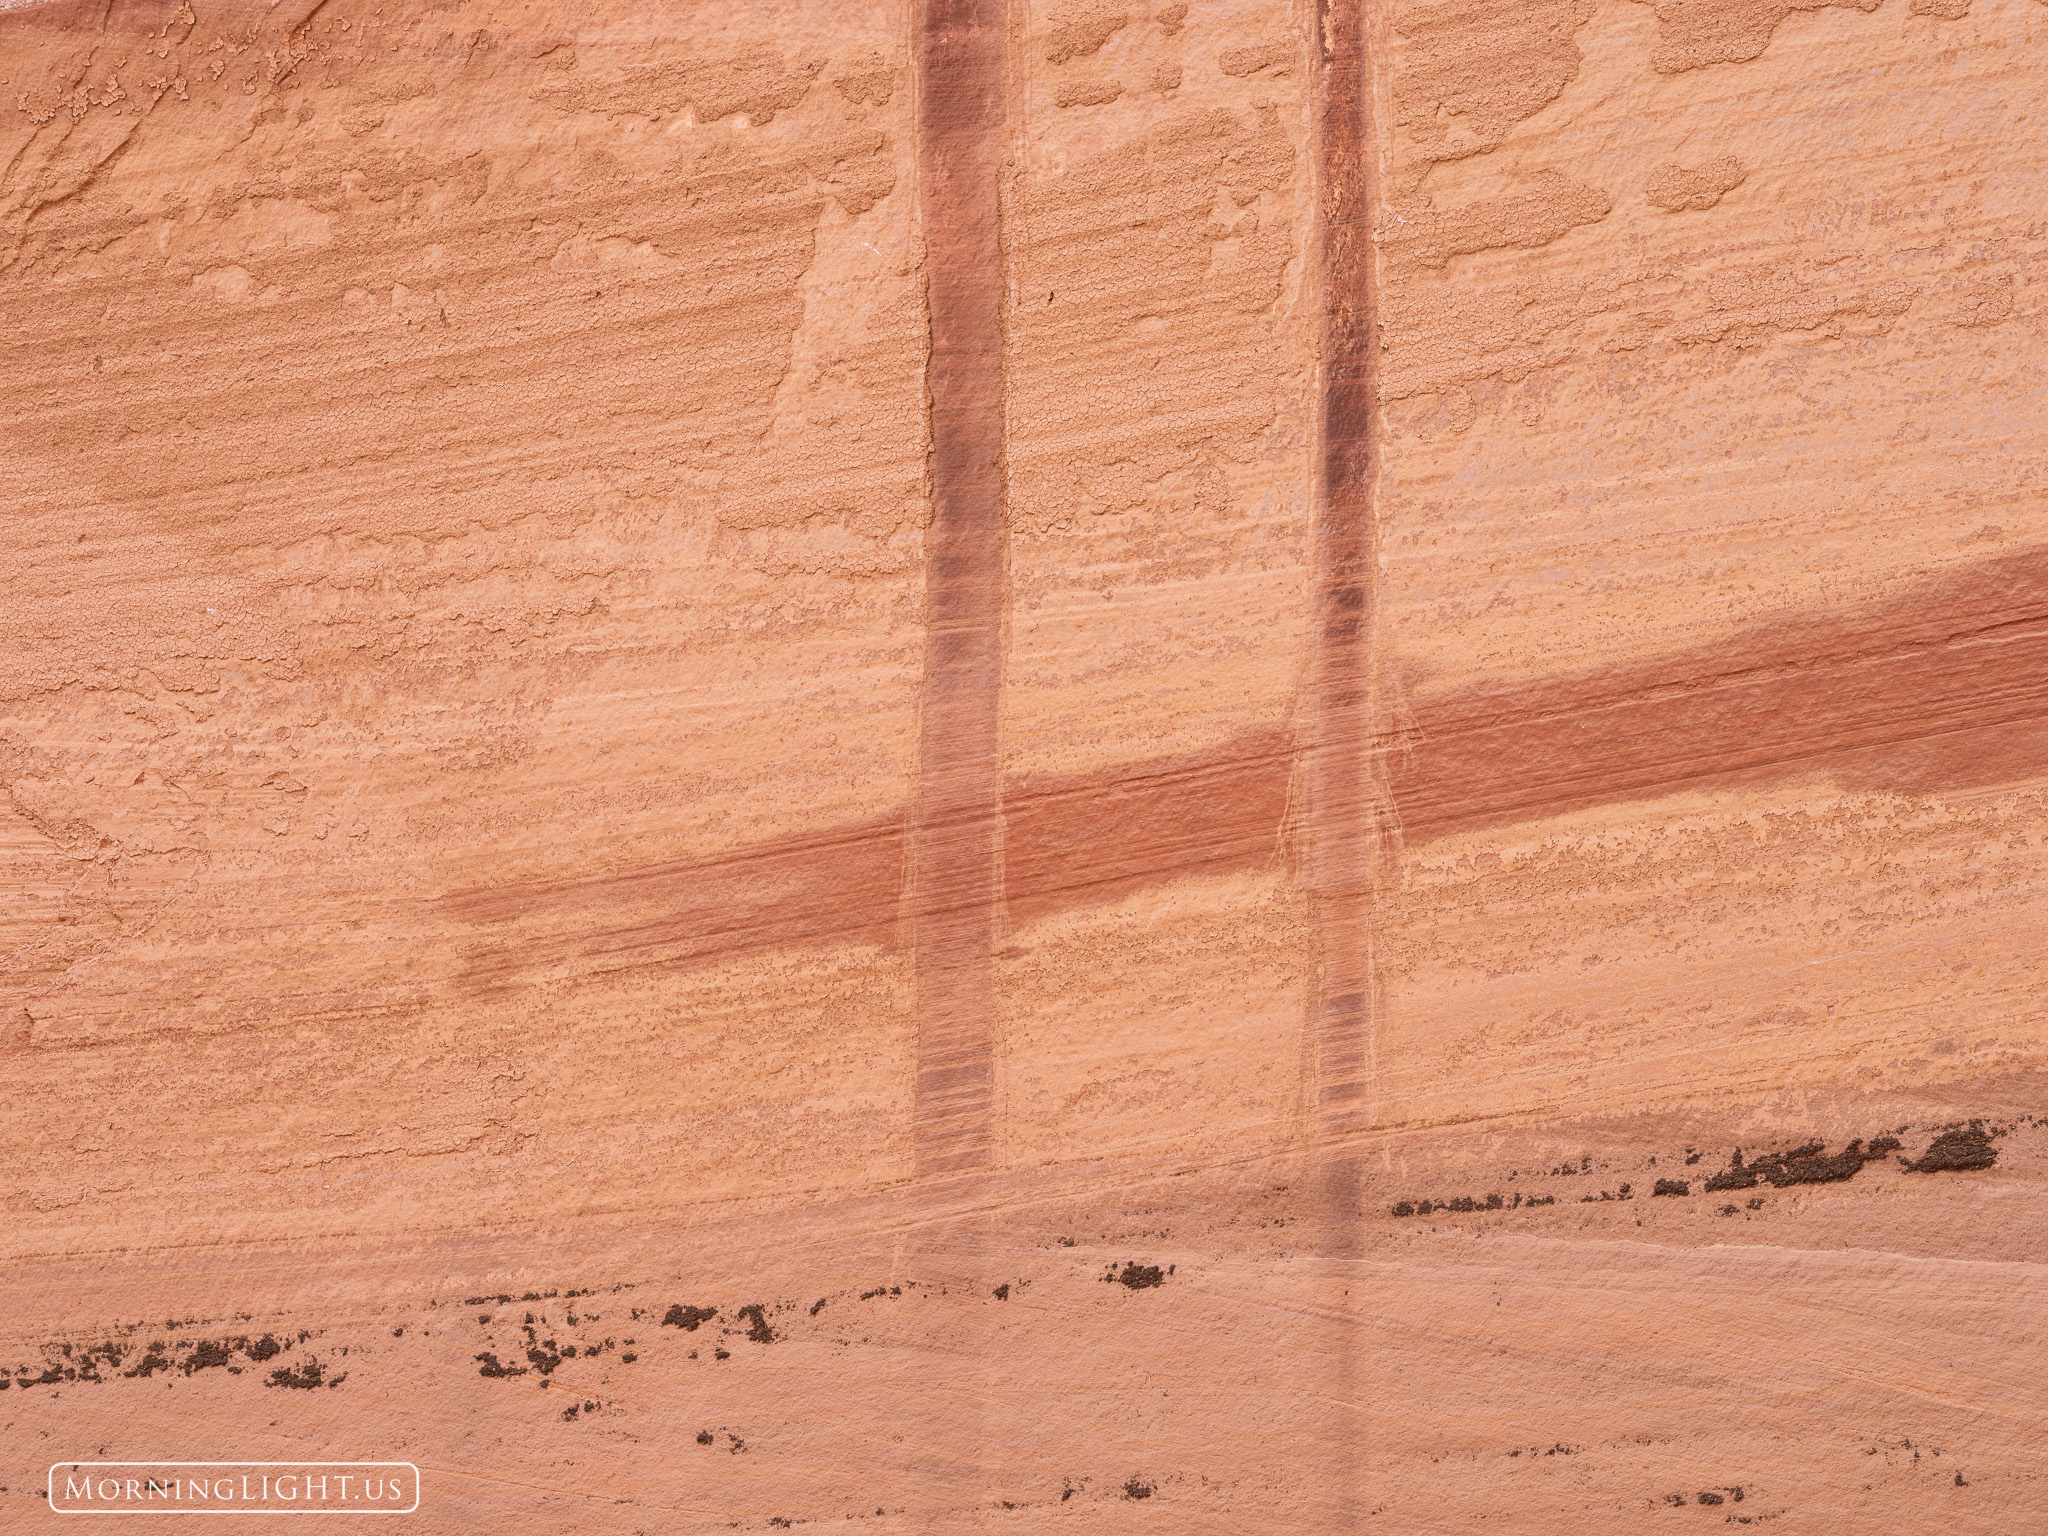 Another sandstone wall that has such abstract beauty. The simple shapes and lines to be found here are mesmerizing.